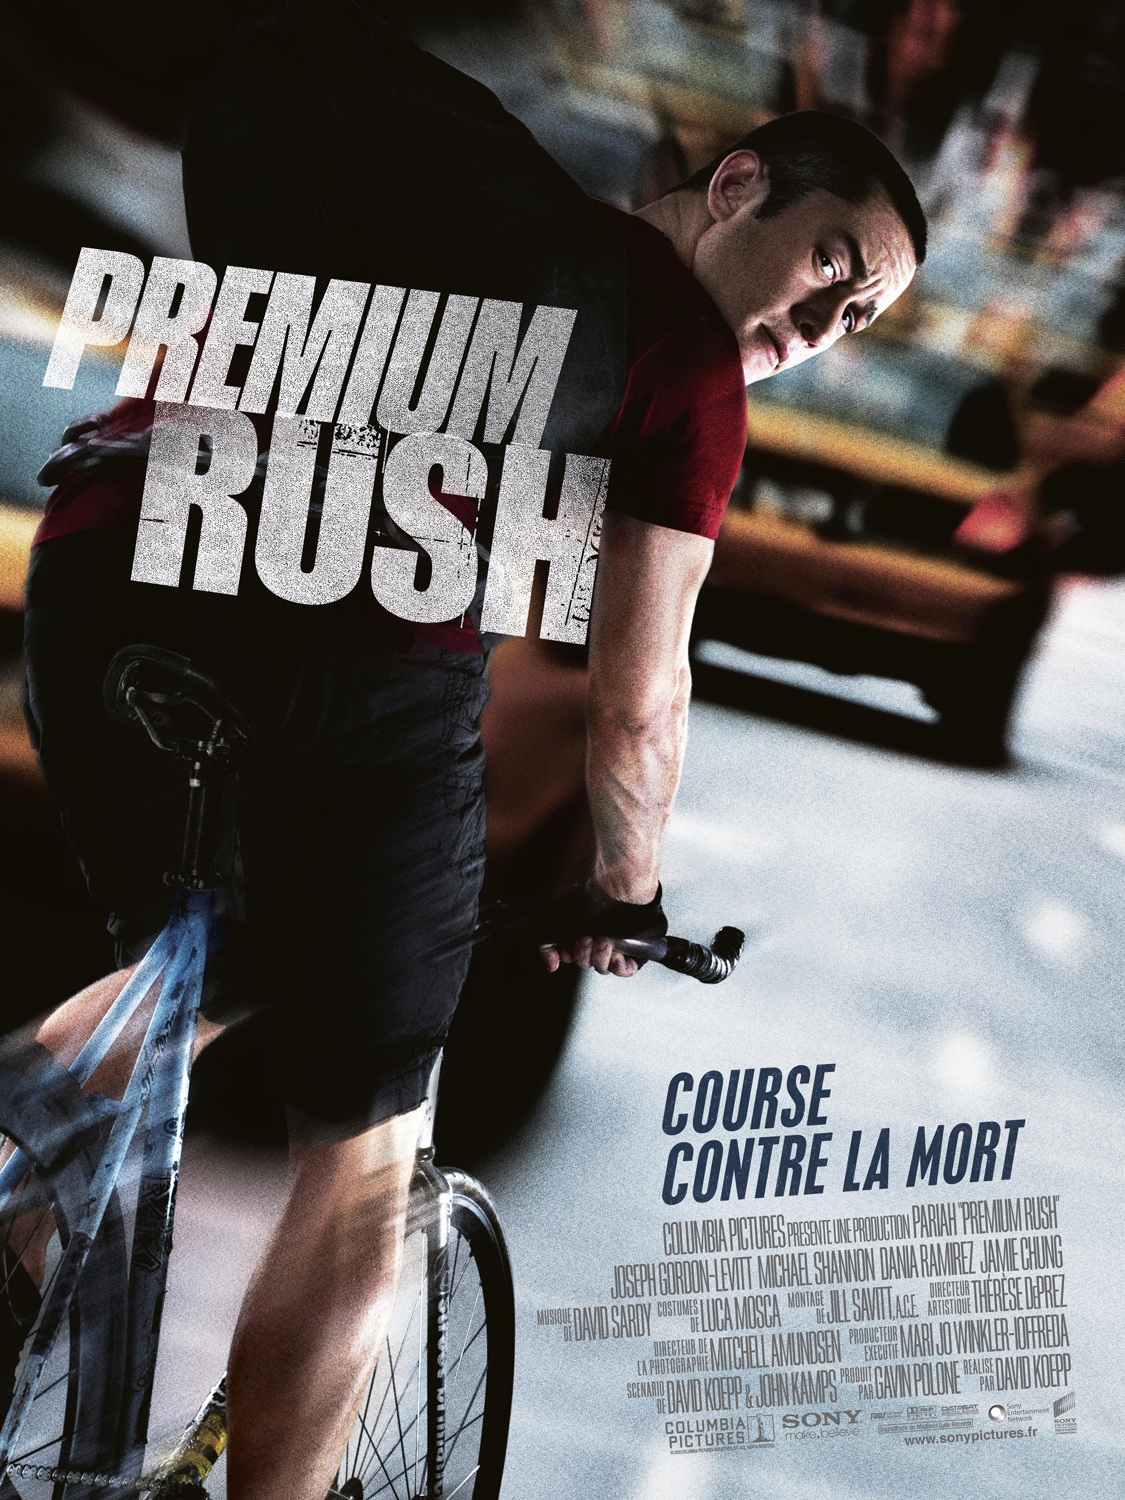 a free download of premium rush movie yify